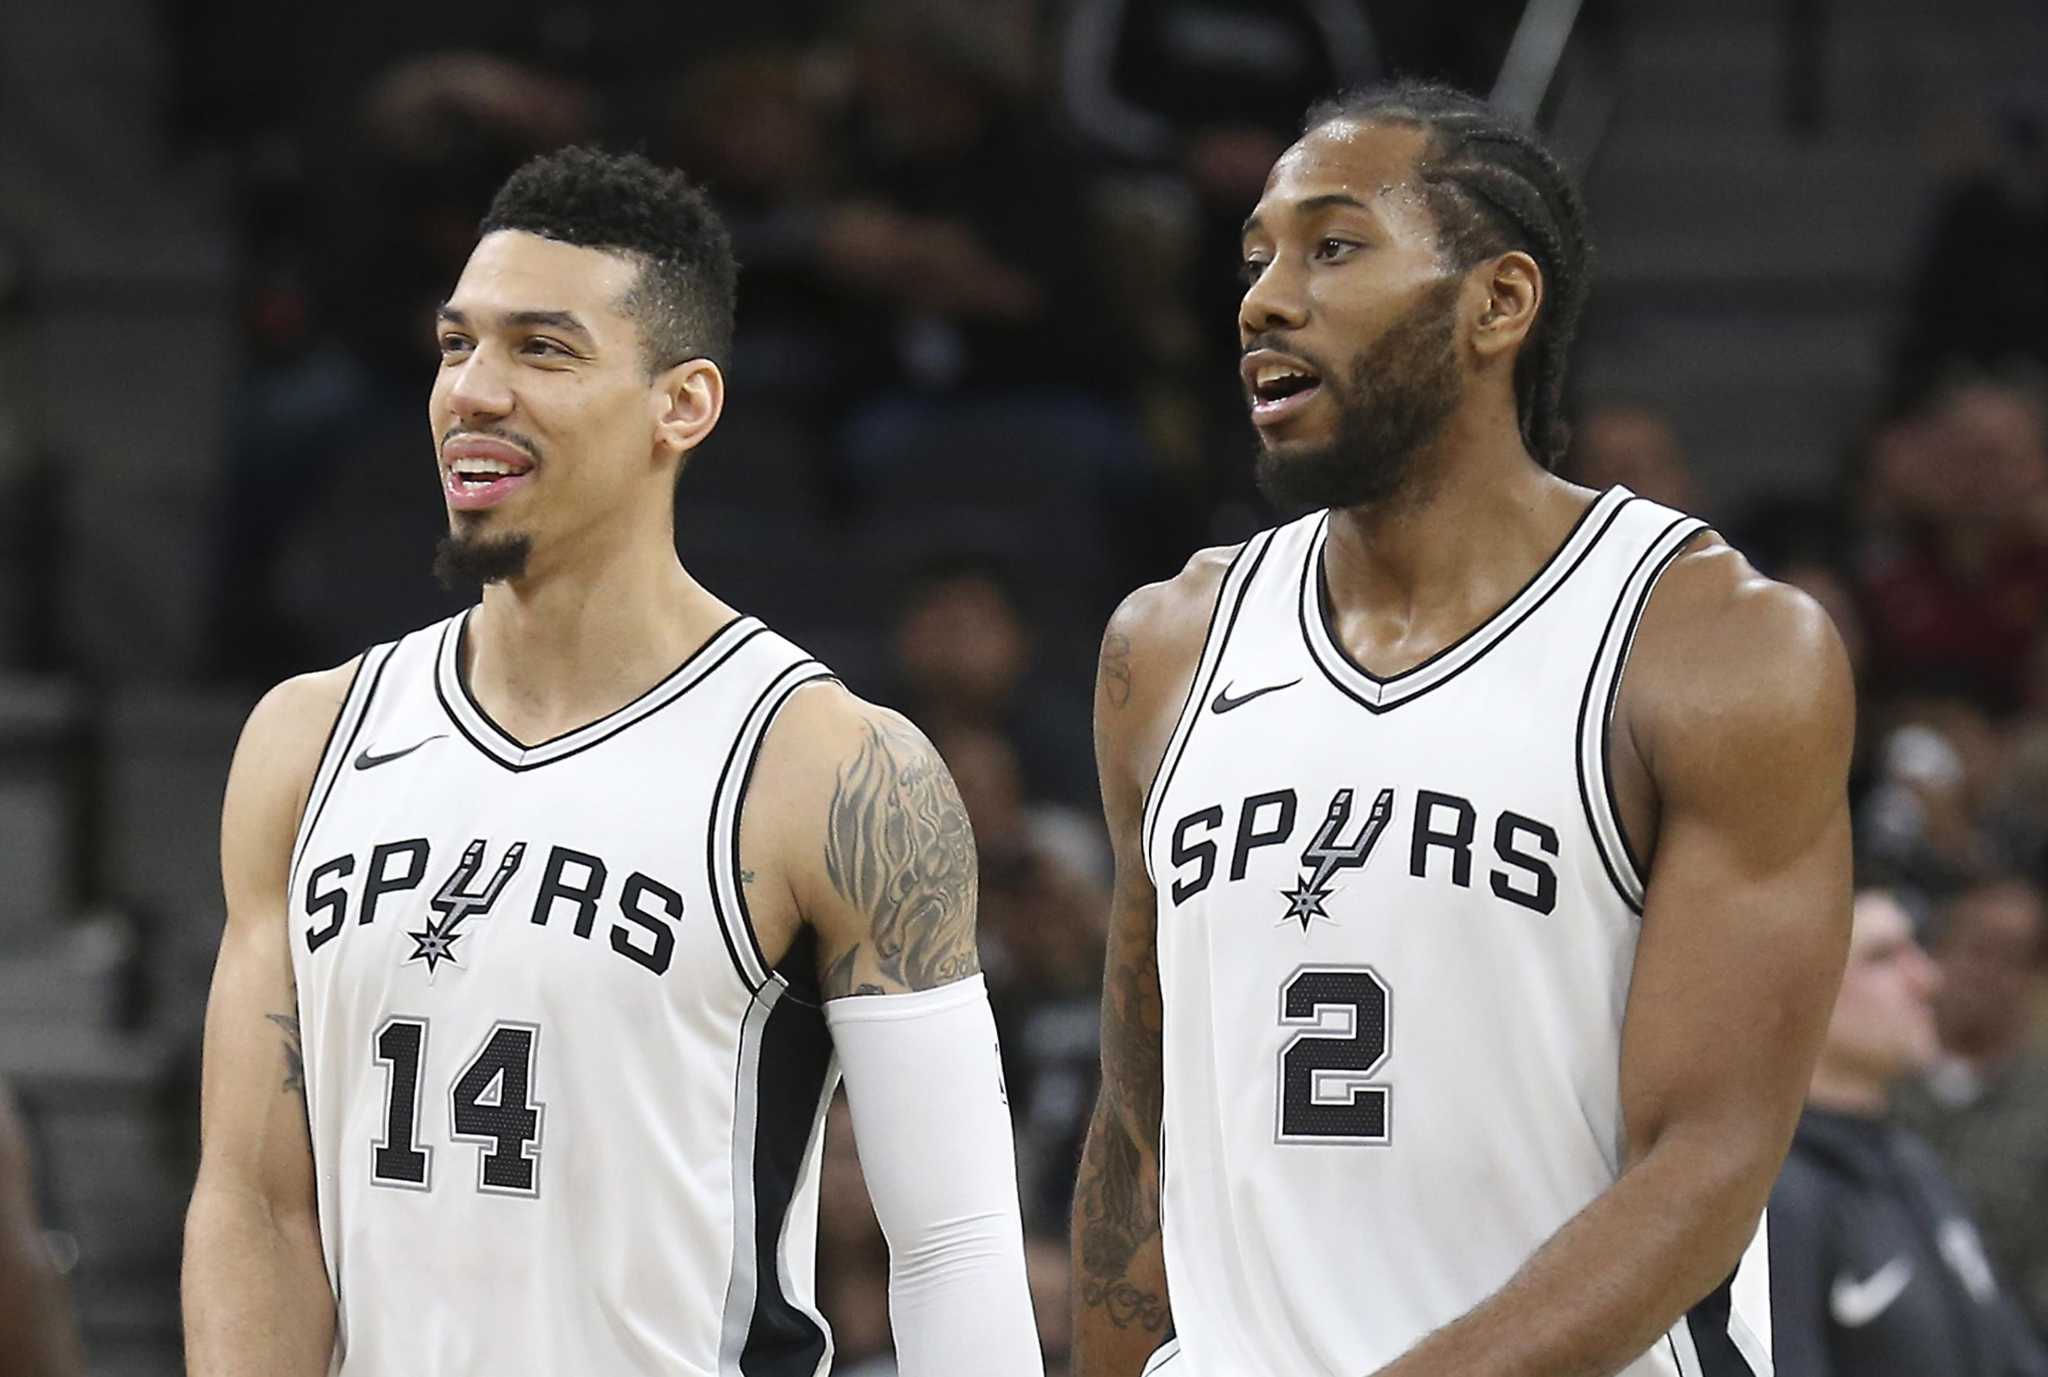 Kawhi Leonard tosses shade at Spurs over comparisons to 2018 injury